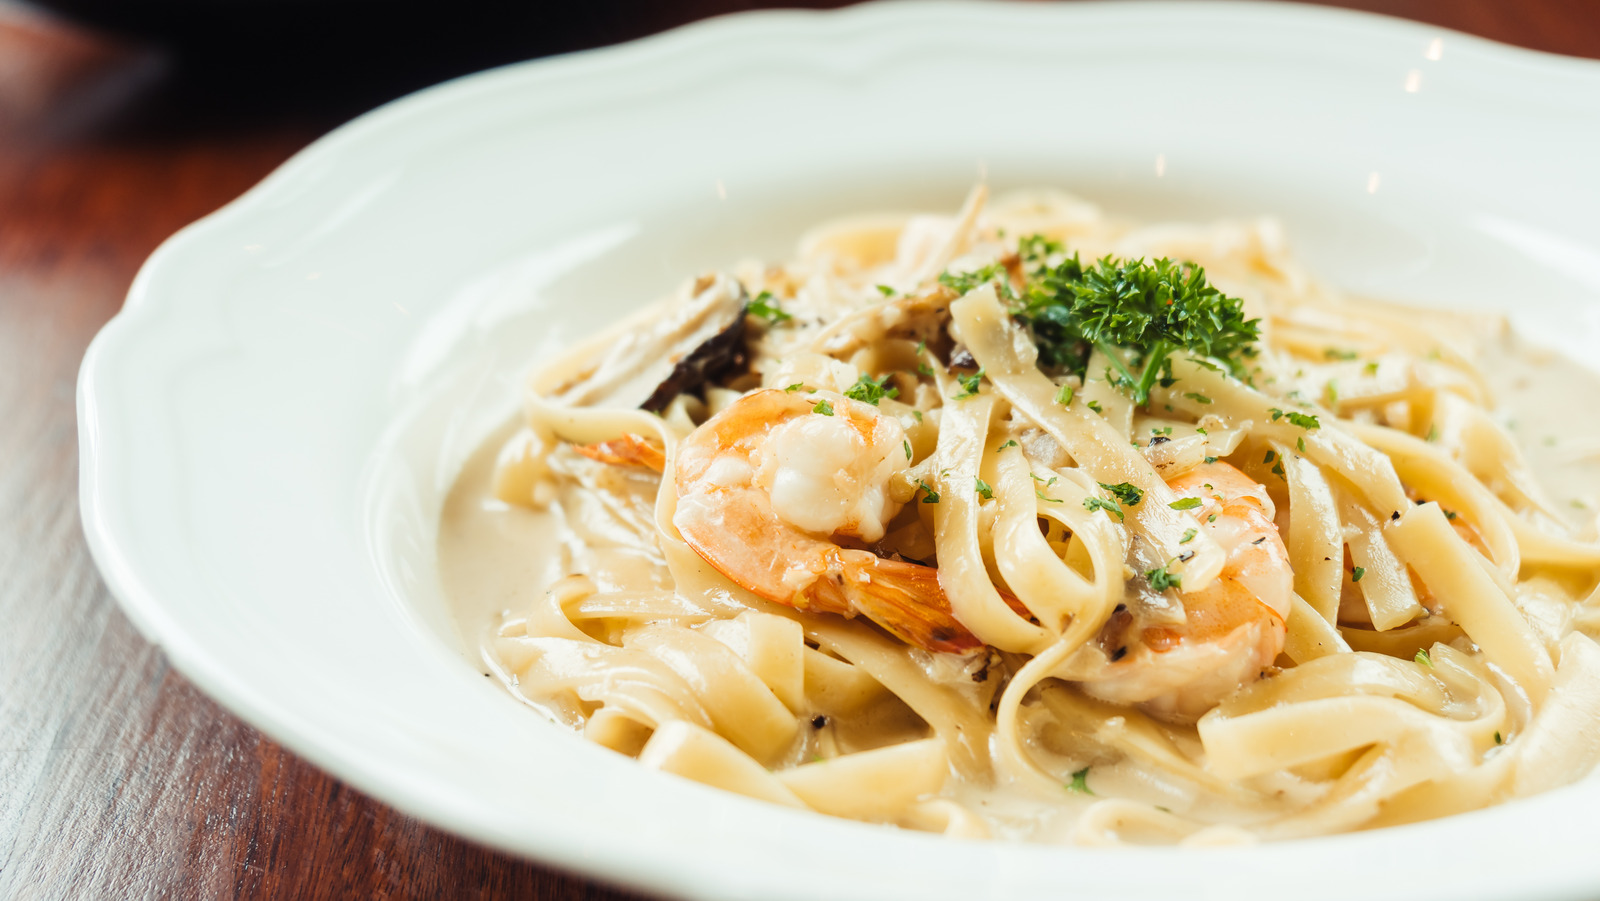 Olive Garden's Never Ending Pasta Bowl Is Back With A Big Change